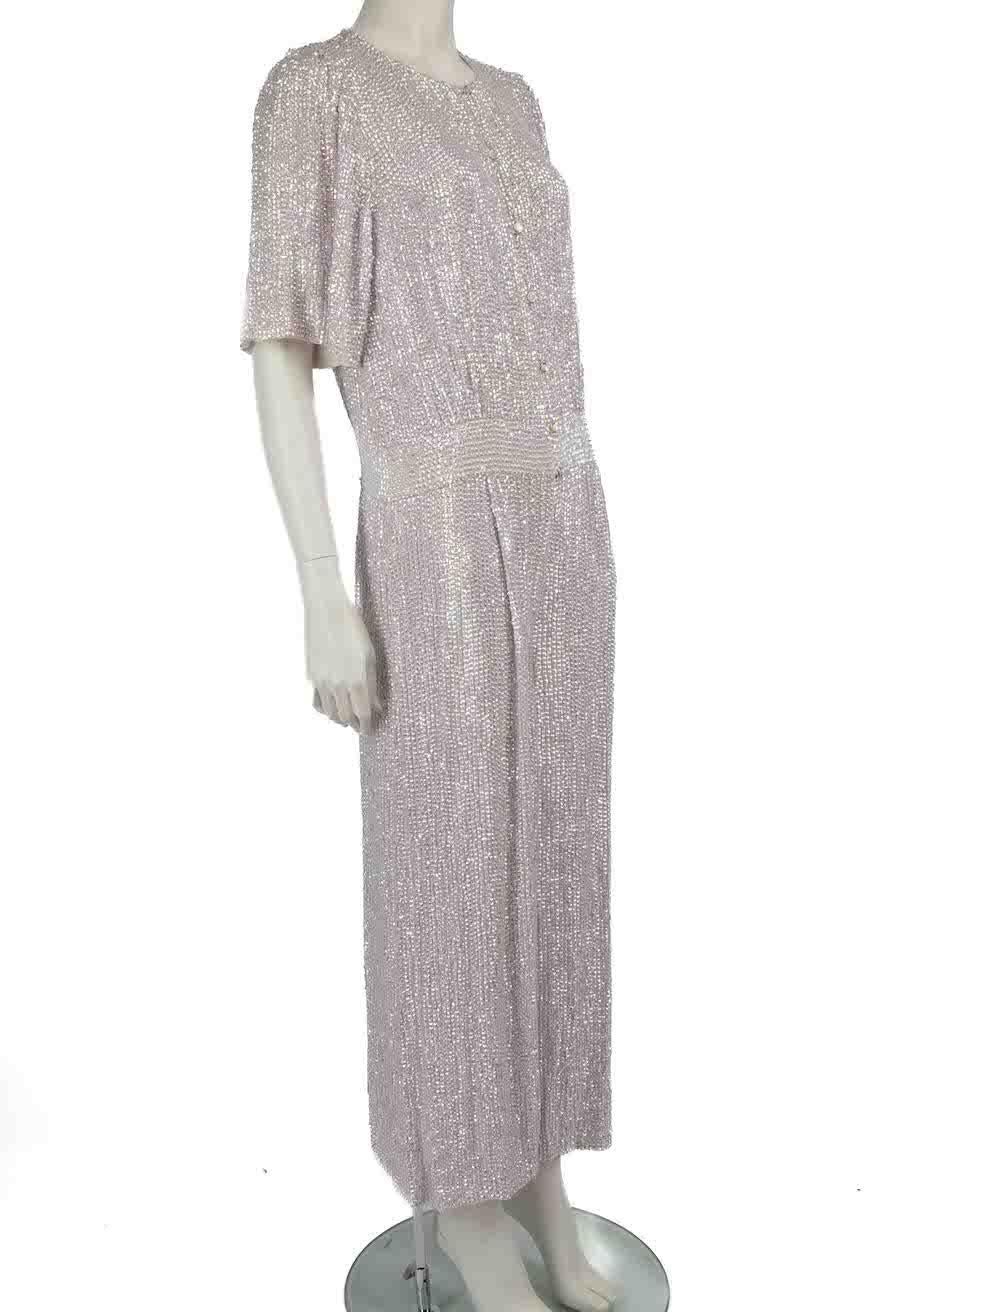 CONDITION is Never worn, with tags. No visible wear to jumpsuit is evident on this new Temperley London designer resale item.
 
 
 
 Details
 
 
 White
 
 Viscose
 
 Jumpsuit
 
 Short sleeves
 
 Sequin embellished
 
 Zip and button up fastening
 
